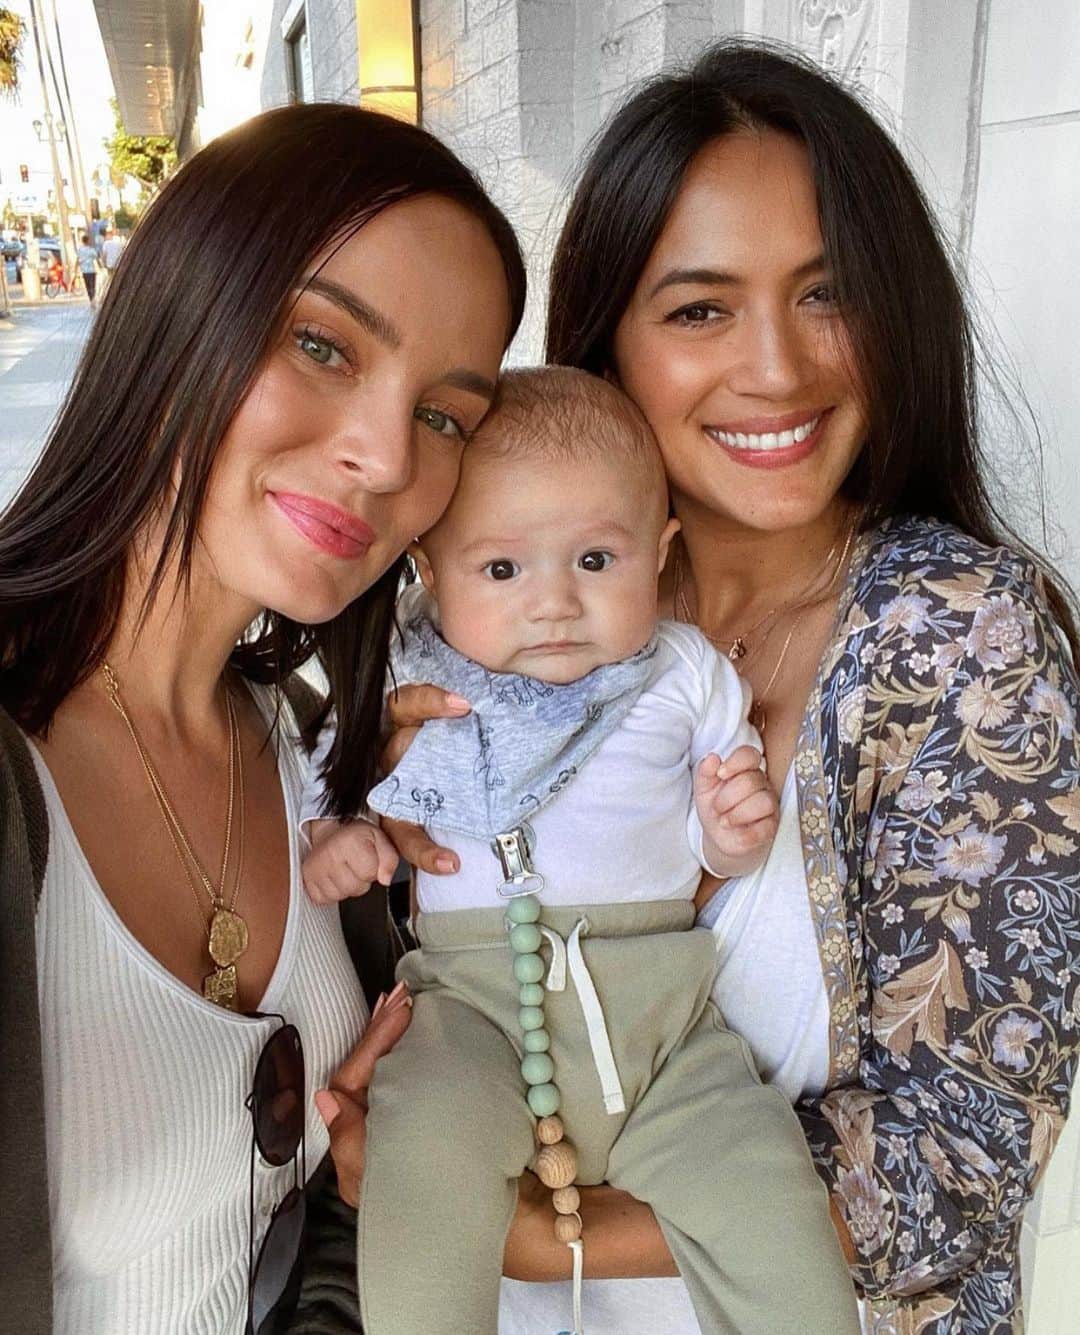 Bianca Cheah Chalmersのインスタグラム：「✨Guess who’s PREGNANT?✨  To my best friend @chloemorello. Congratulations on this incredible news. I know that you might have a flurry of emotions right now, but I'm here to let you know that you've got this and I've got you. There is so much happiness, excitement, and a multiverse of love ahead of you. You might be wondering what kind of mother you'll be, but I have no doubt that you'll be an incredible one. When I look at you with my own child, it gives me so much joy. To see how kind and loving you are, the amount of patience you have, nevermind that instant connection you and @sebamecha share with Olly! Your baby is going to be so so lucky to have you as a mother.   I'm here for you no matter what. Ask for anything, I'm yours. Your support throughout my own pregnancy has been life-changing. I'm returning the favor tenfold when your baby arrives. I'll read the books, I'll massage your feet, I'll tell you everything that I know about being a mum. My advice is here, but you don't have to take it. You are embarking on your own journey. I already know I'm going to love and fall in love with your baby.   The fact that we'll get to raise our children together makes me so happy. The fact that you're my sister, my best friend gives me so much joy. You are my family.   Love you to eternity and back xxx」